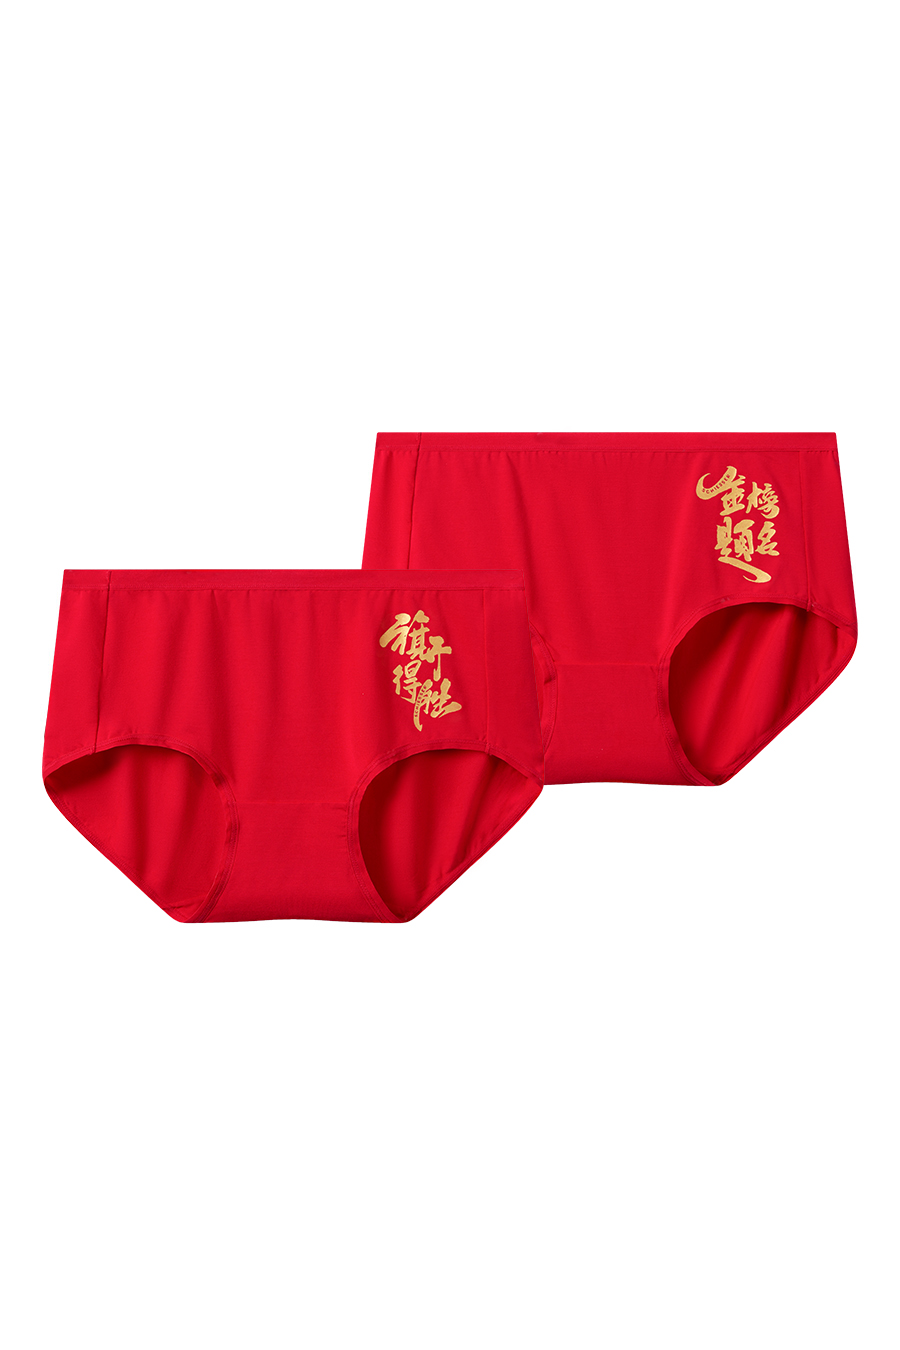 SCHIESSER Ladies' Lucky Red Carbon-Zero Modal Hipster Panties